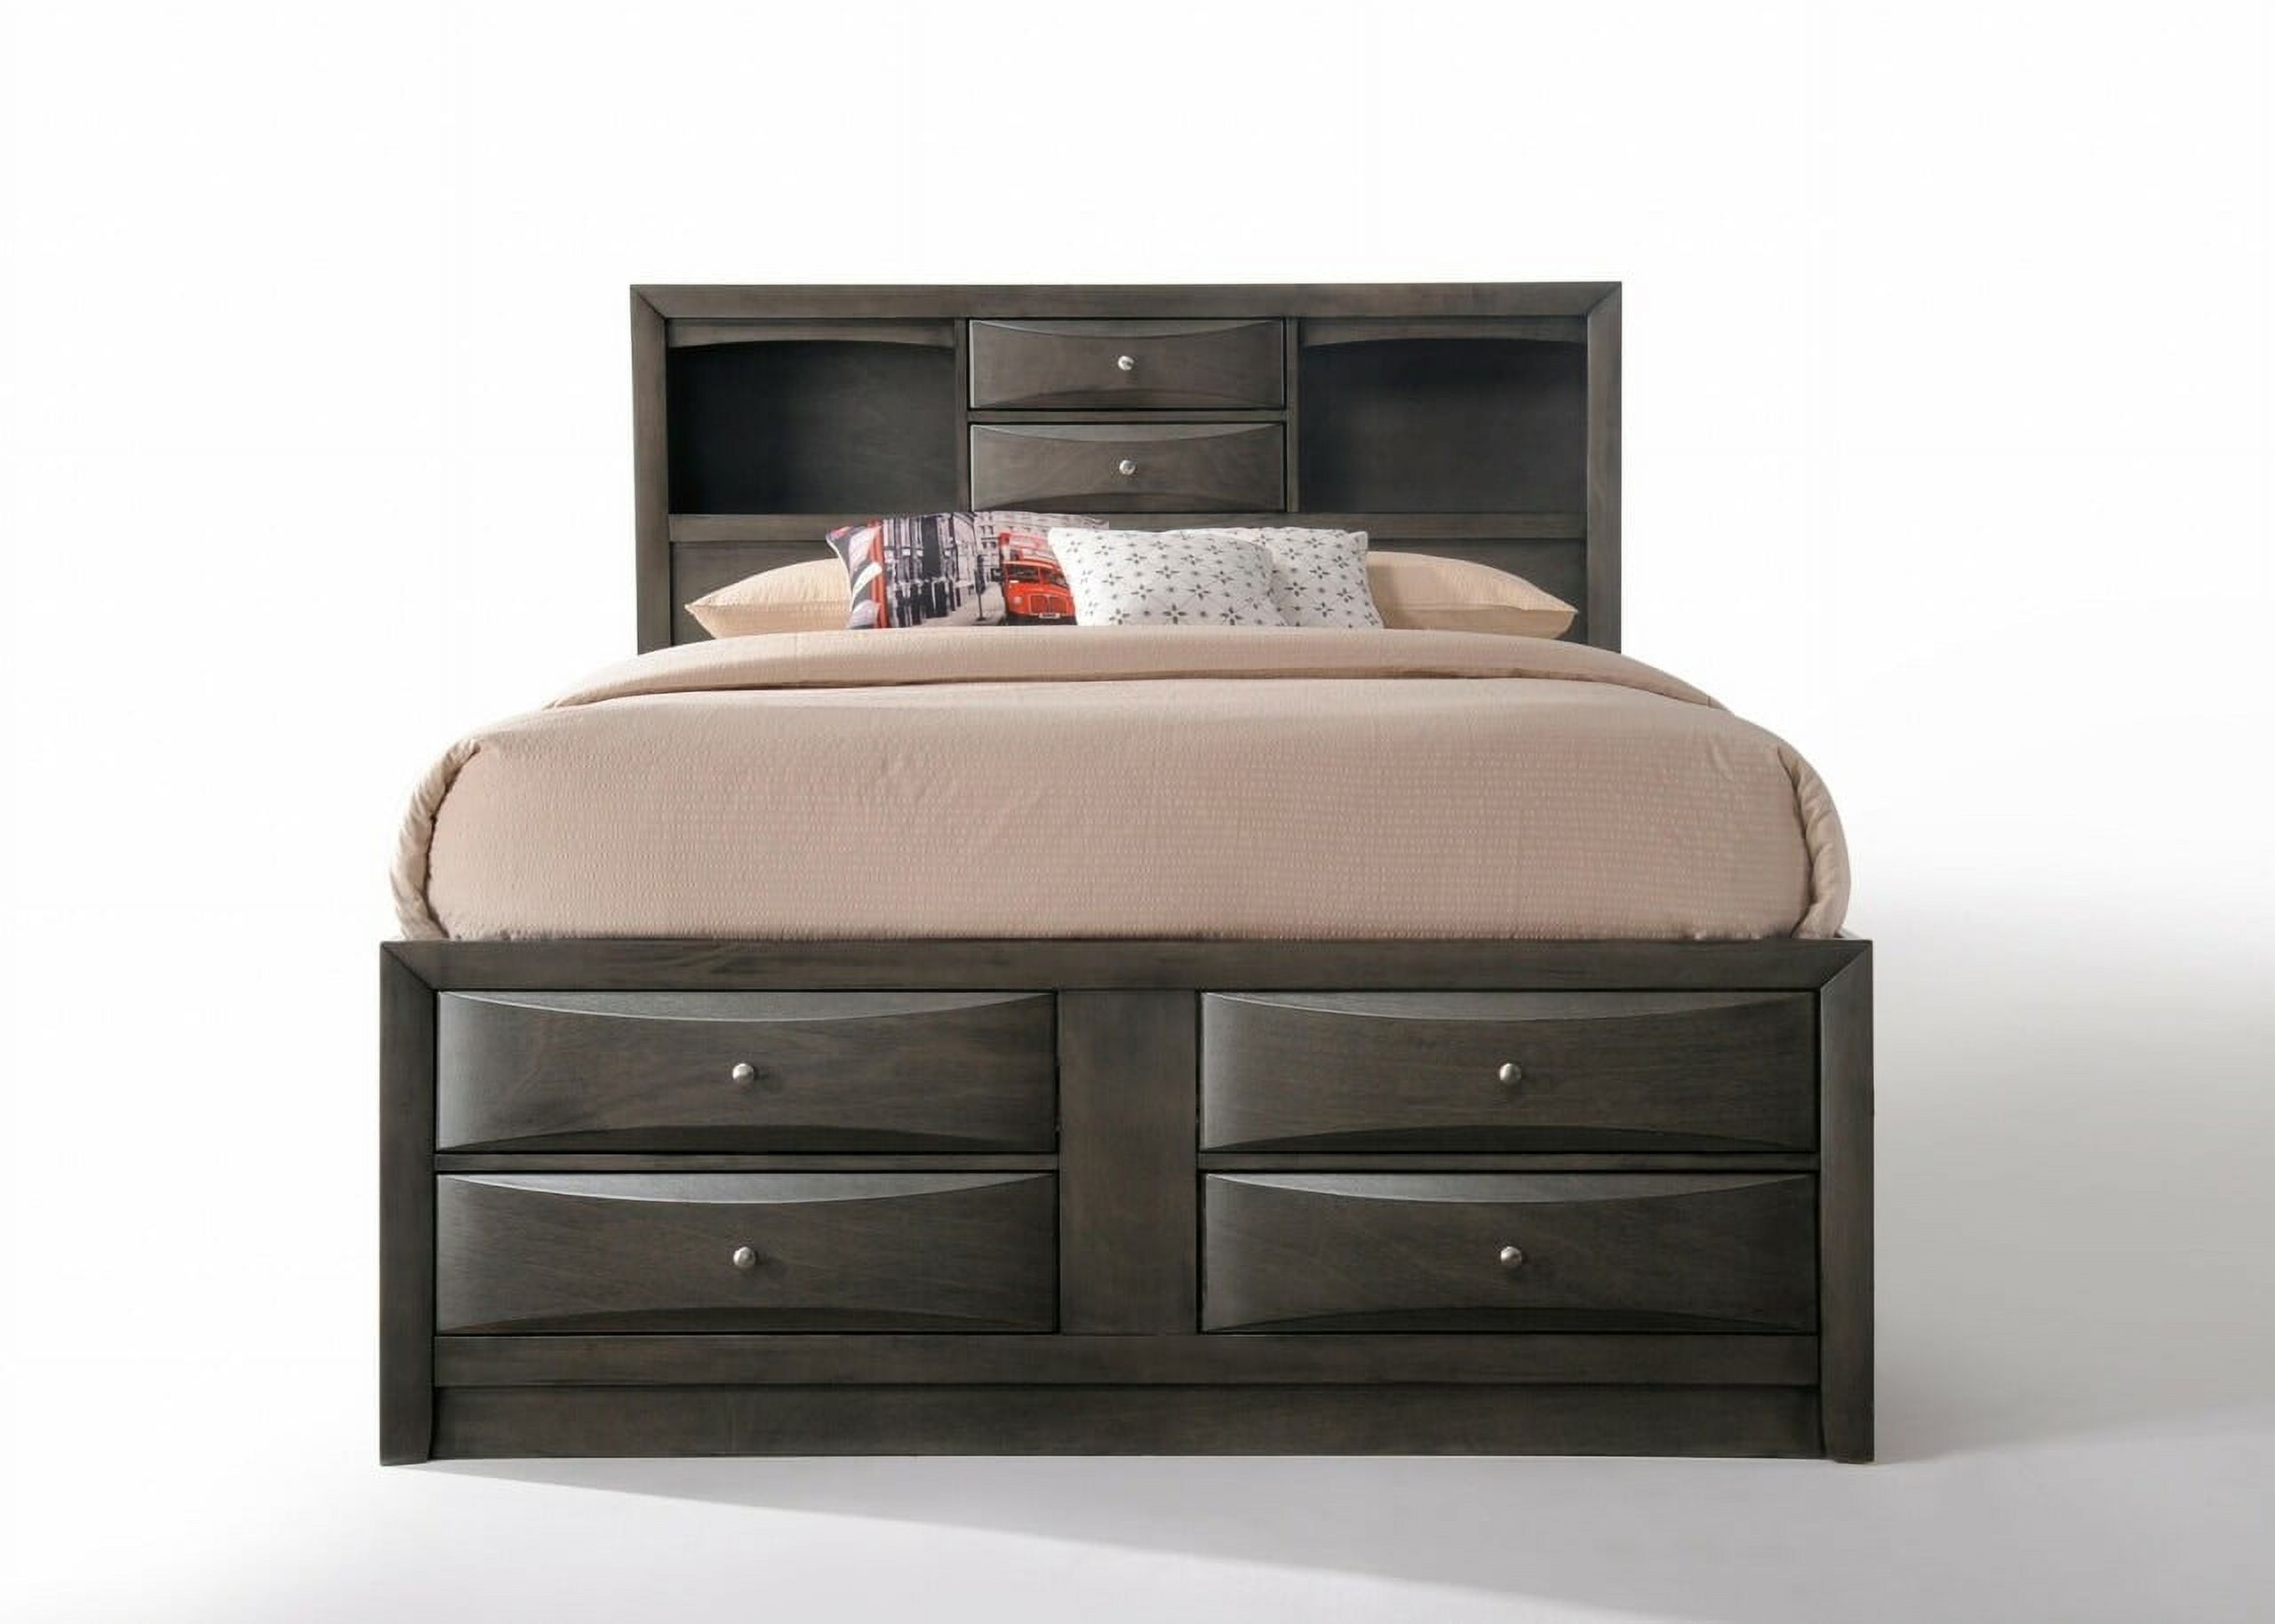 86" X 57" X 56" Gray Oak Rubber Wood Full Storage Bed - image 2 of 6